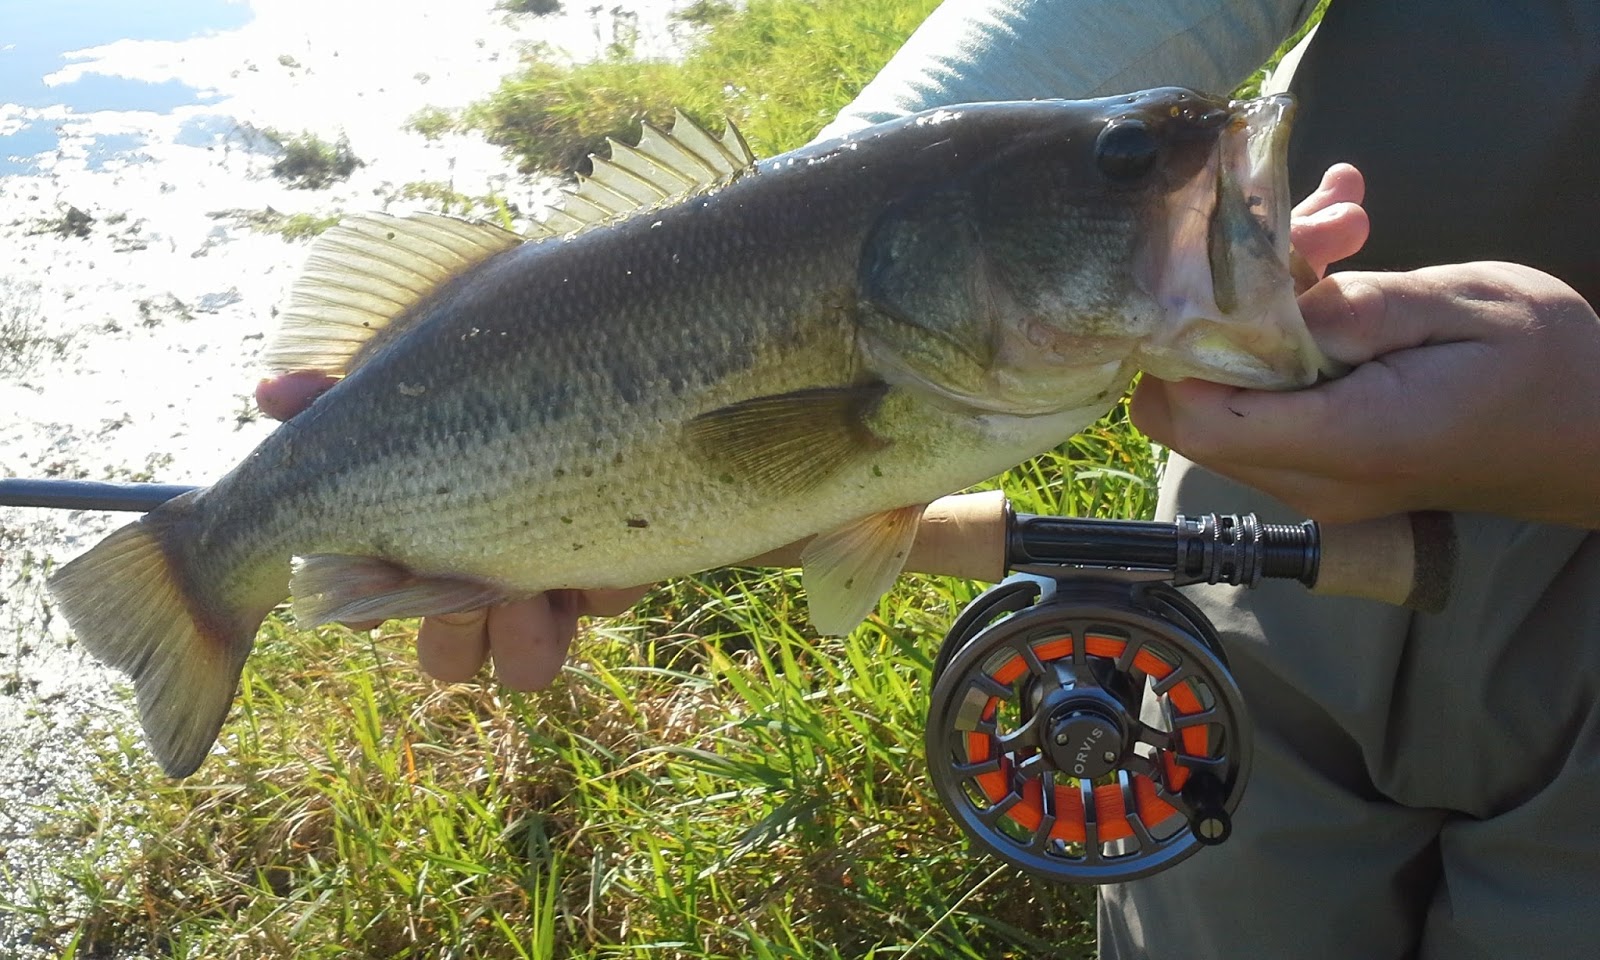 The Show Me Fly Guy: Why don't more people fly fish for bass?